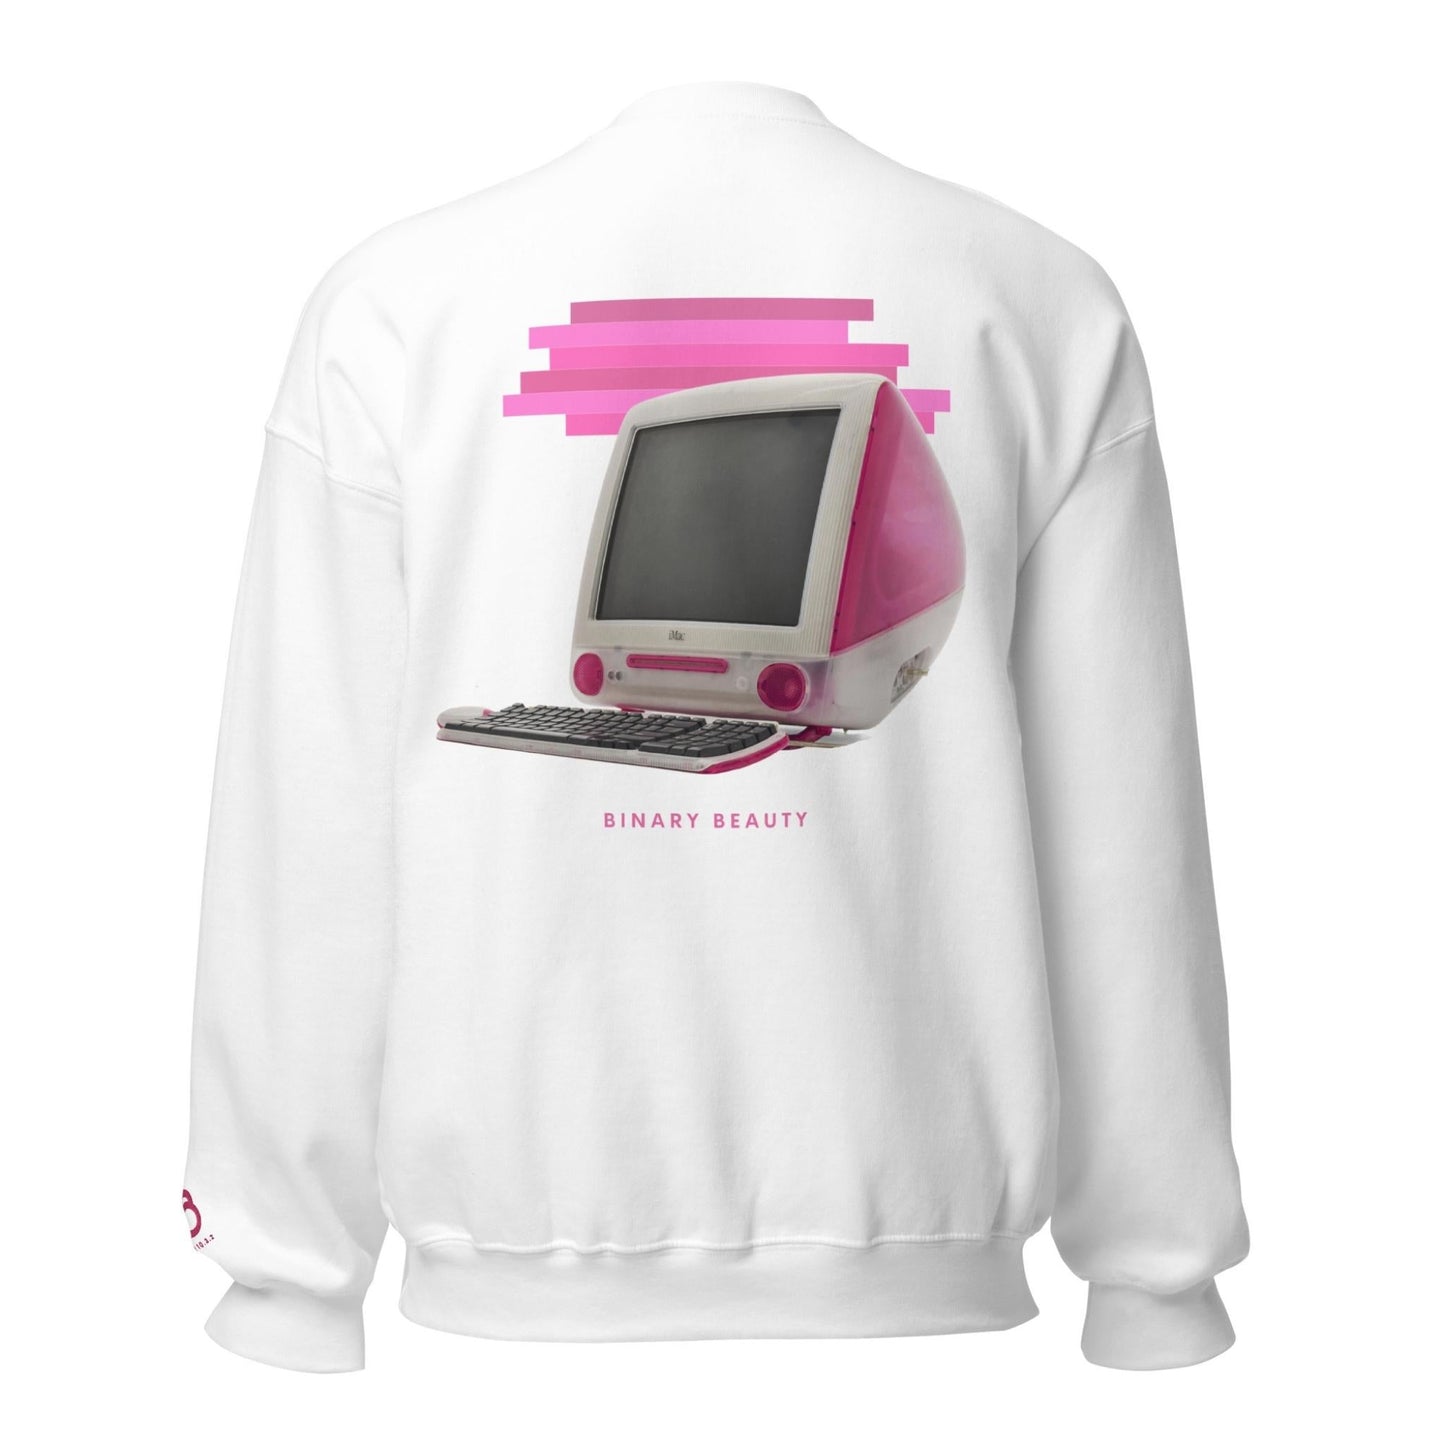 iCandy Softwear Crewneck in White